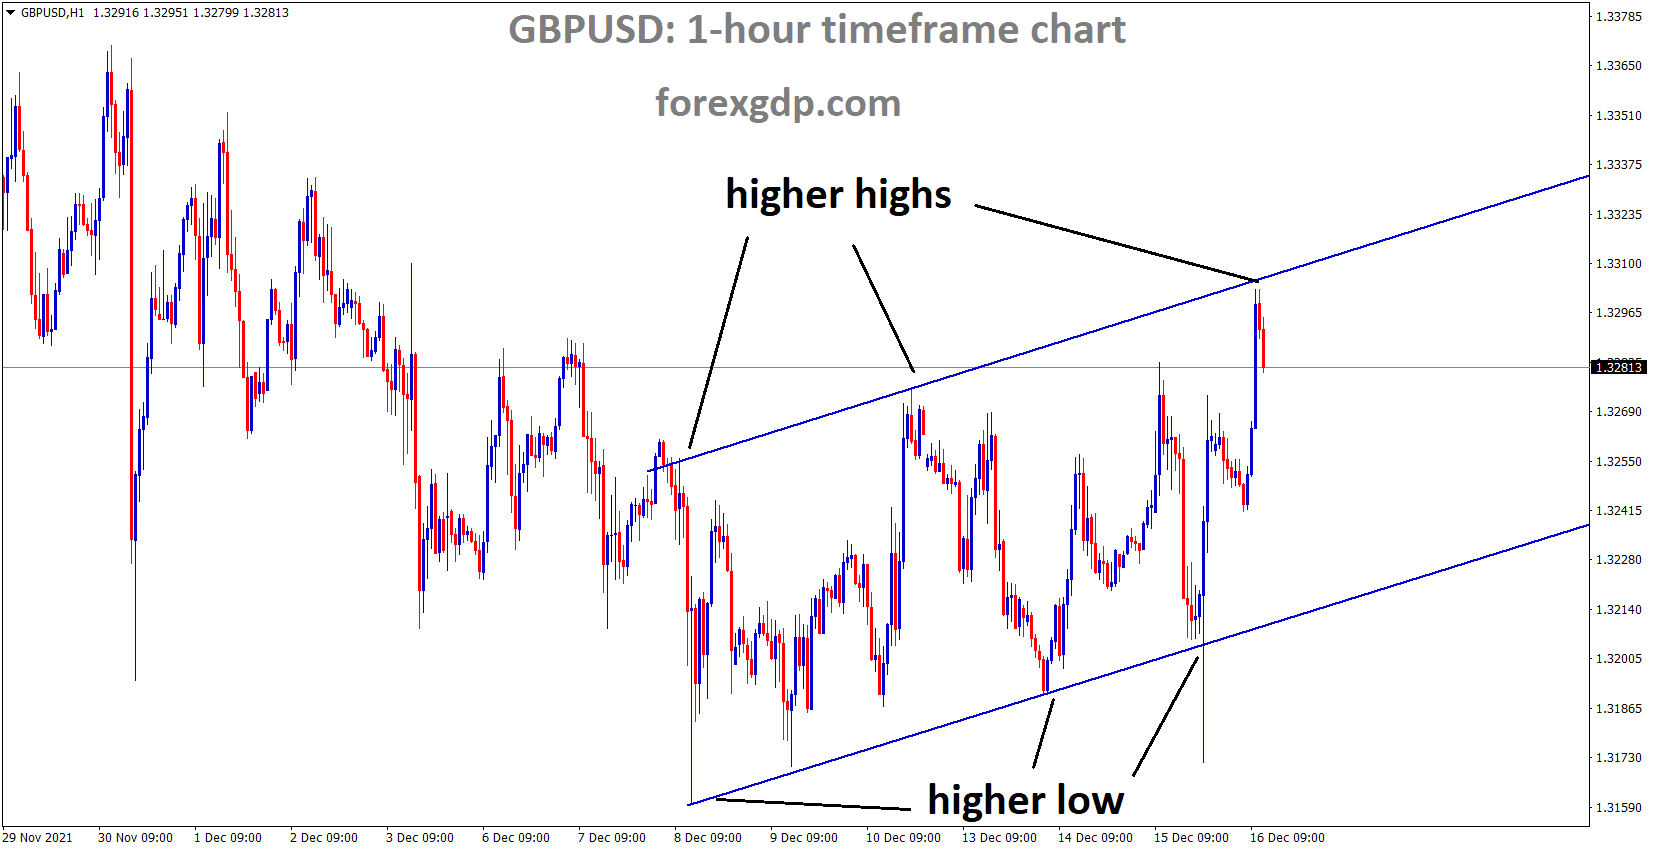 GBPUSD is moving in an Ascending channel and the market fell from the higher high area of the channel 1